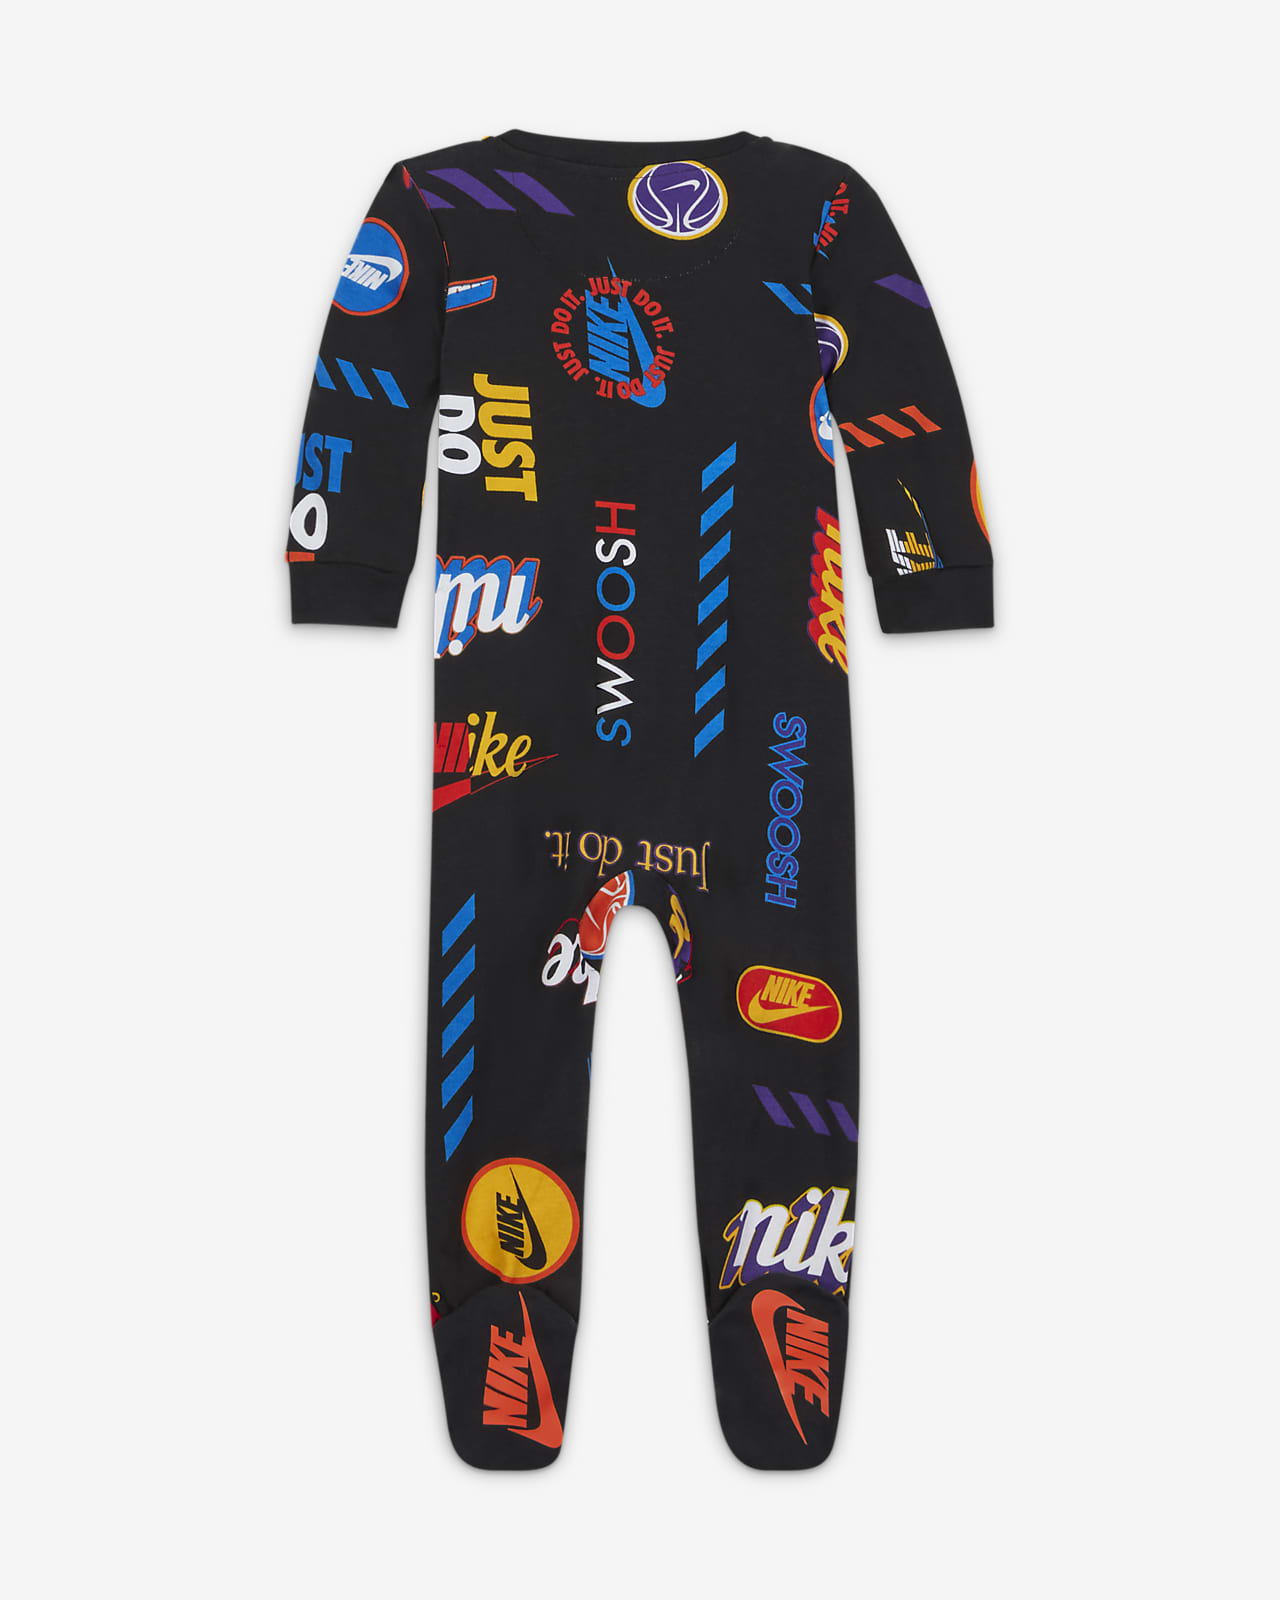 Nike Baby (0-9M) Footed Coverall. Full-Zip